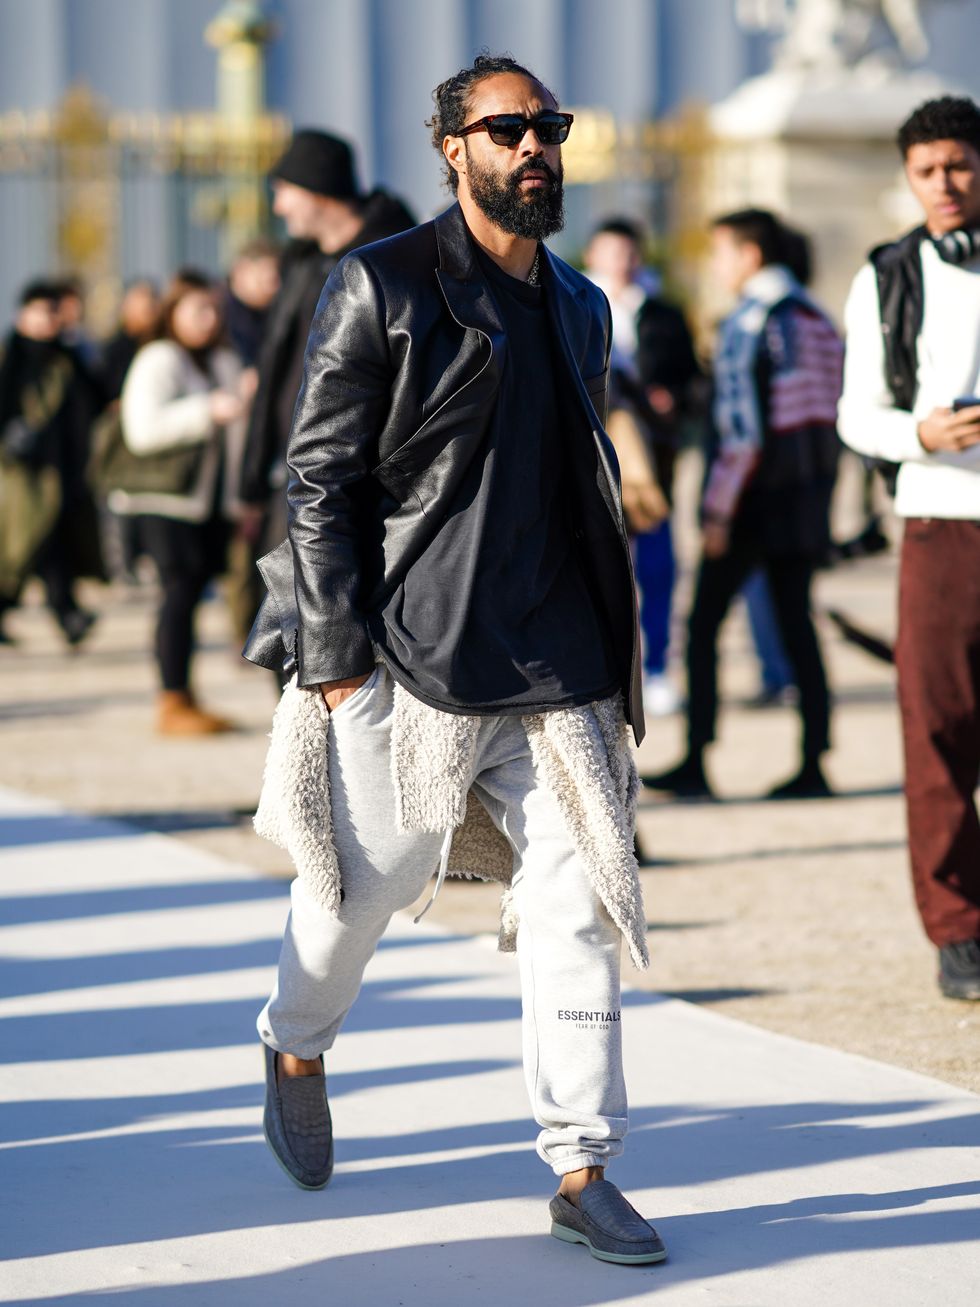 paris, france   january 16 jerry lorenzo, fear of god founder, wears sunglasses, silver chain necklace, a black wool pullover, a beige fluffy jacket, black shiny oversized leather coat, gray essentials sport pants, gray crocodile pattern leather moccasins, outside vuitton, during paris fashion week   menswear fall  winter 2020 2021 on january 16, 2020 in paris, france photo by edward berthelotgetty images